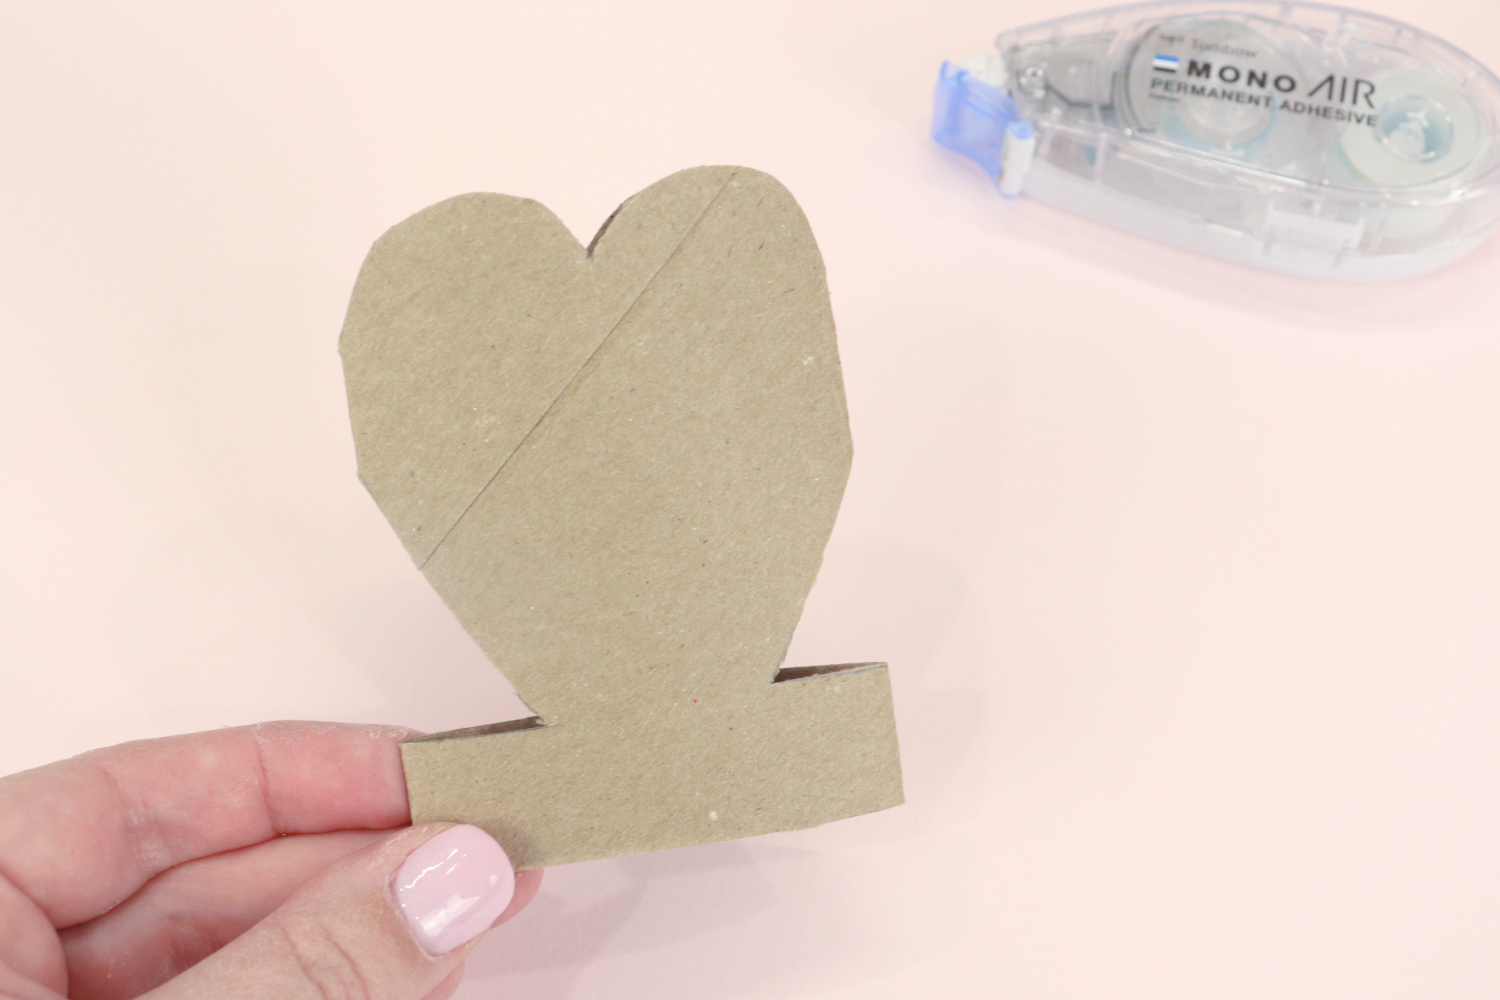 Image contains Amy’s hand holding a heart shape cut from a toilet paper roll. An adhesive runner sits behind it on a pink background.